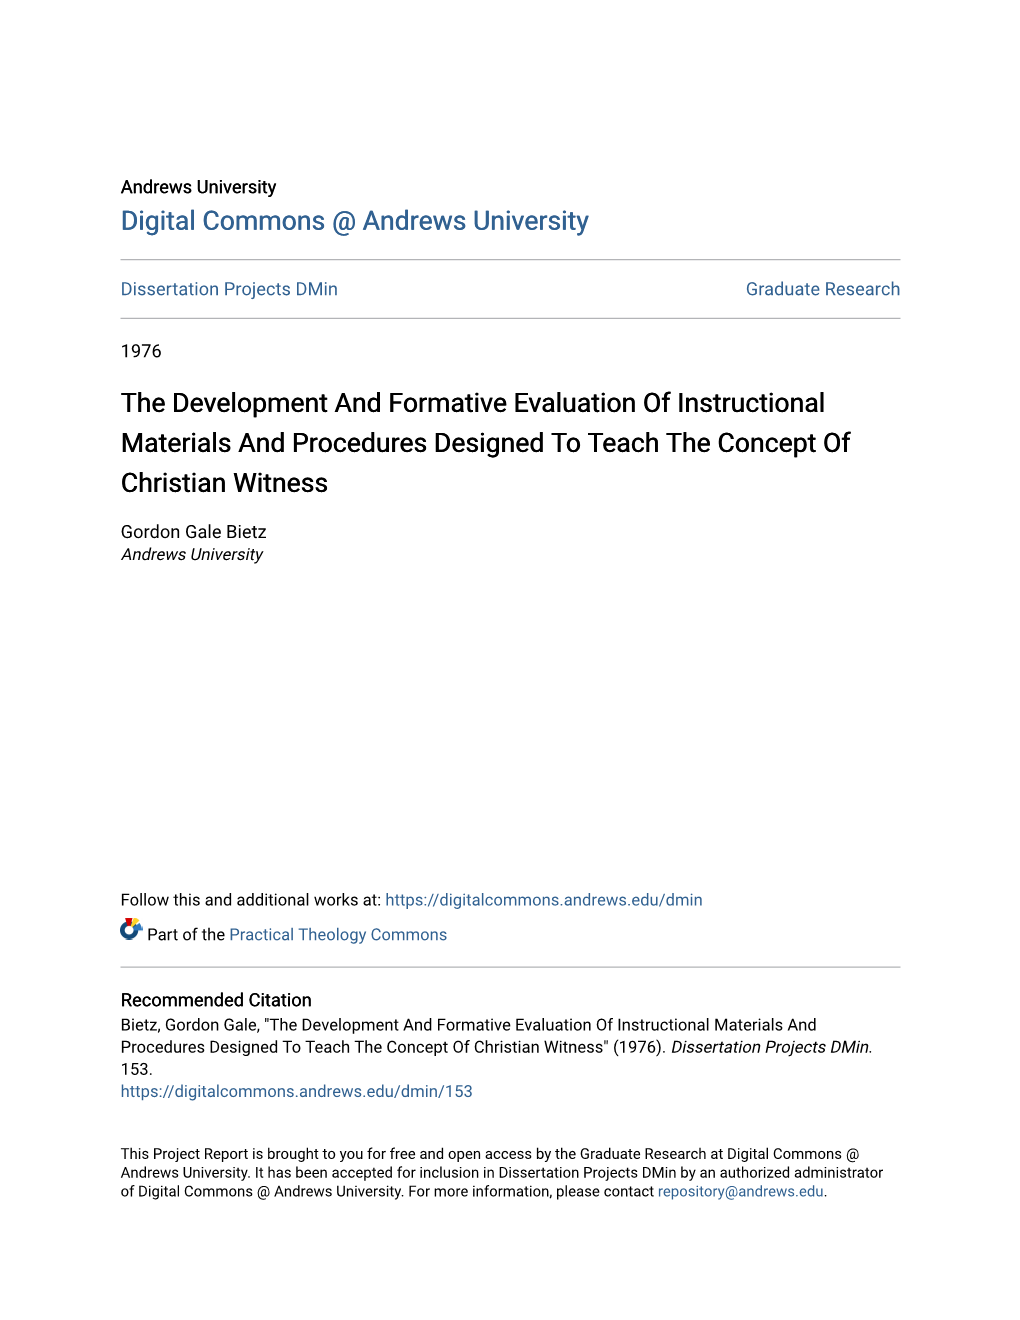 The Development and Formative Evaluation of Instructional Materials and Procedures Designed to Teach the Concept of Christian Witness